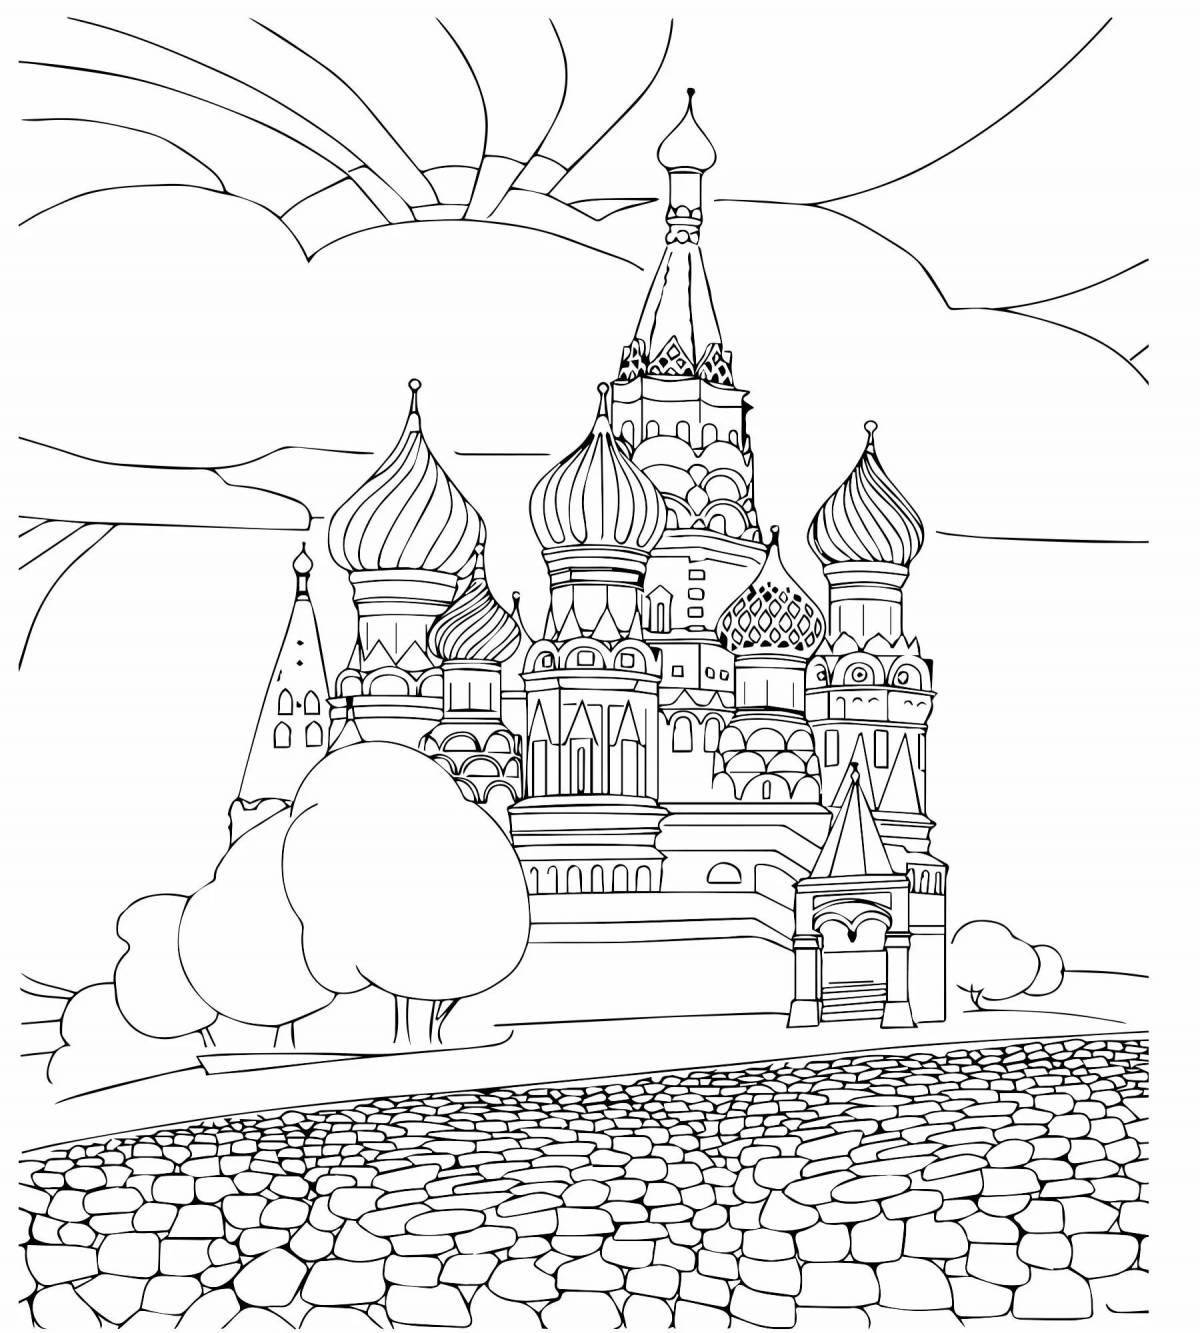 Glowing russia my homeland coloring book for children 6-7 years old